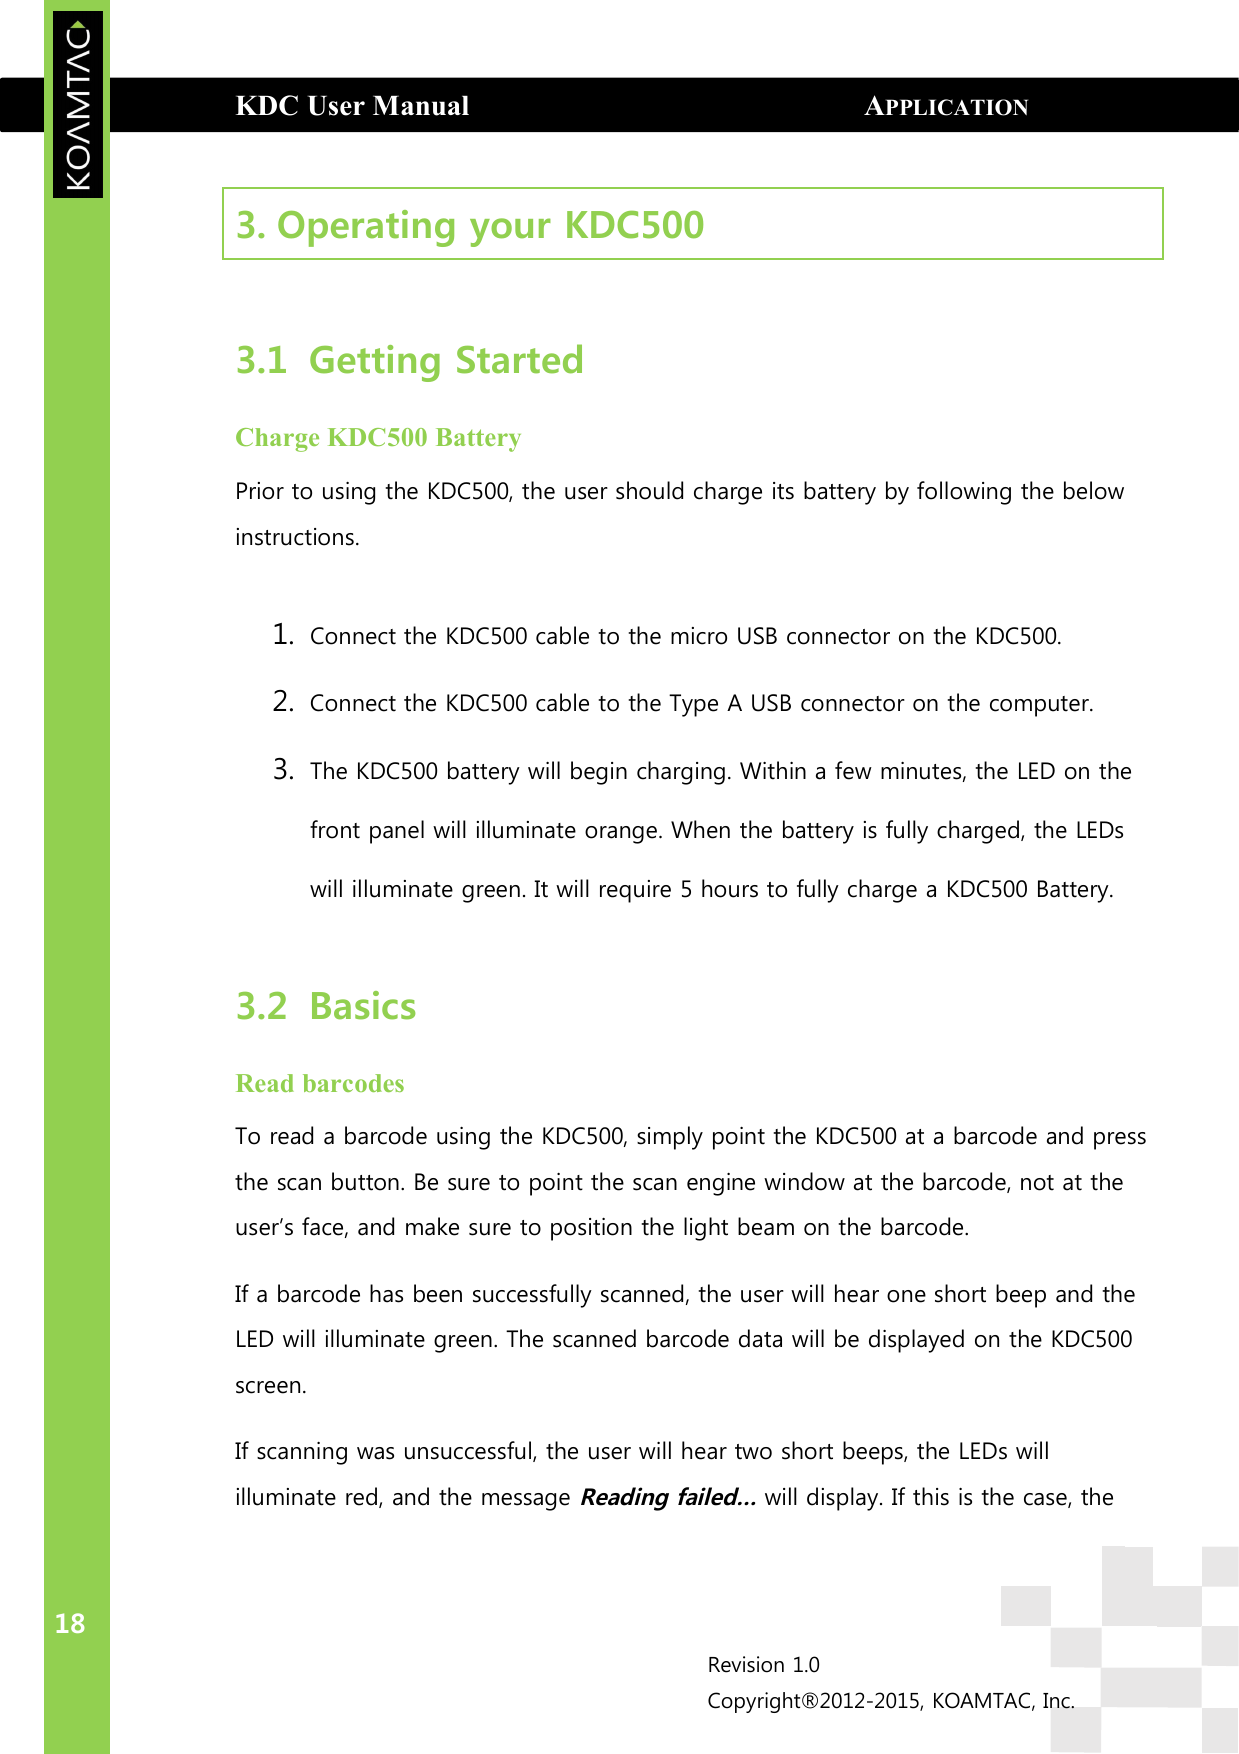 KDC User Manual                                                      APPLICATION GENERATION  18 Revision 1.0 Copyright®2012-2015, KOAMTAC, Inc.  3. Operating your KDC500    3.1 Getting Started Charge KDC500 Battery Prior to using the KDC500, the user should charge its battery by following the below instructions.  1. Connect the KDC500 cable to the micro USB connector on the KDC500. 2. Connect the KDC500 cable to the Type A USB connector on the computer. 3. The KDC500 battery will begin charging. Within a few minutes, the LED on the front panel will illuminate orange. When the battery is fully charged, the LEDs will illuminate green. It will require 5 hours to fully charge a KDC500 Battery.  3.2 Basics Read barcodes To read a barcode using the KDC500, simply point the KDC500 at a barcode and press the scan button. Be sure to point the scan engine window at the barcode, not at the user’s face, and make sure to position the light beam on the barcode.  If a barcode has been successfully scanned, the user will hear one short beep and the LED will illuminate green. The scanned barcode data will be displayed on the KDC500 screen. If scanning was unsuccessful, the user will hear two short beeps, the LEDs will illuminate red, and the message Reading failed… will display. If this is the case, the 